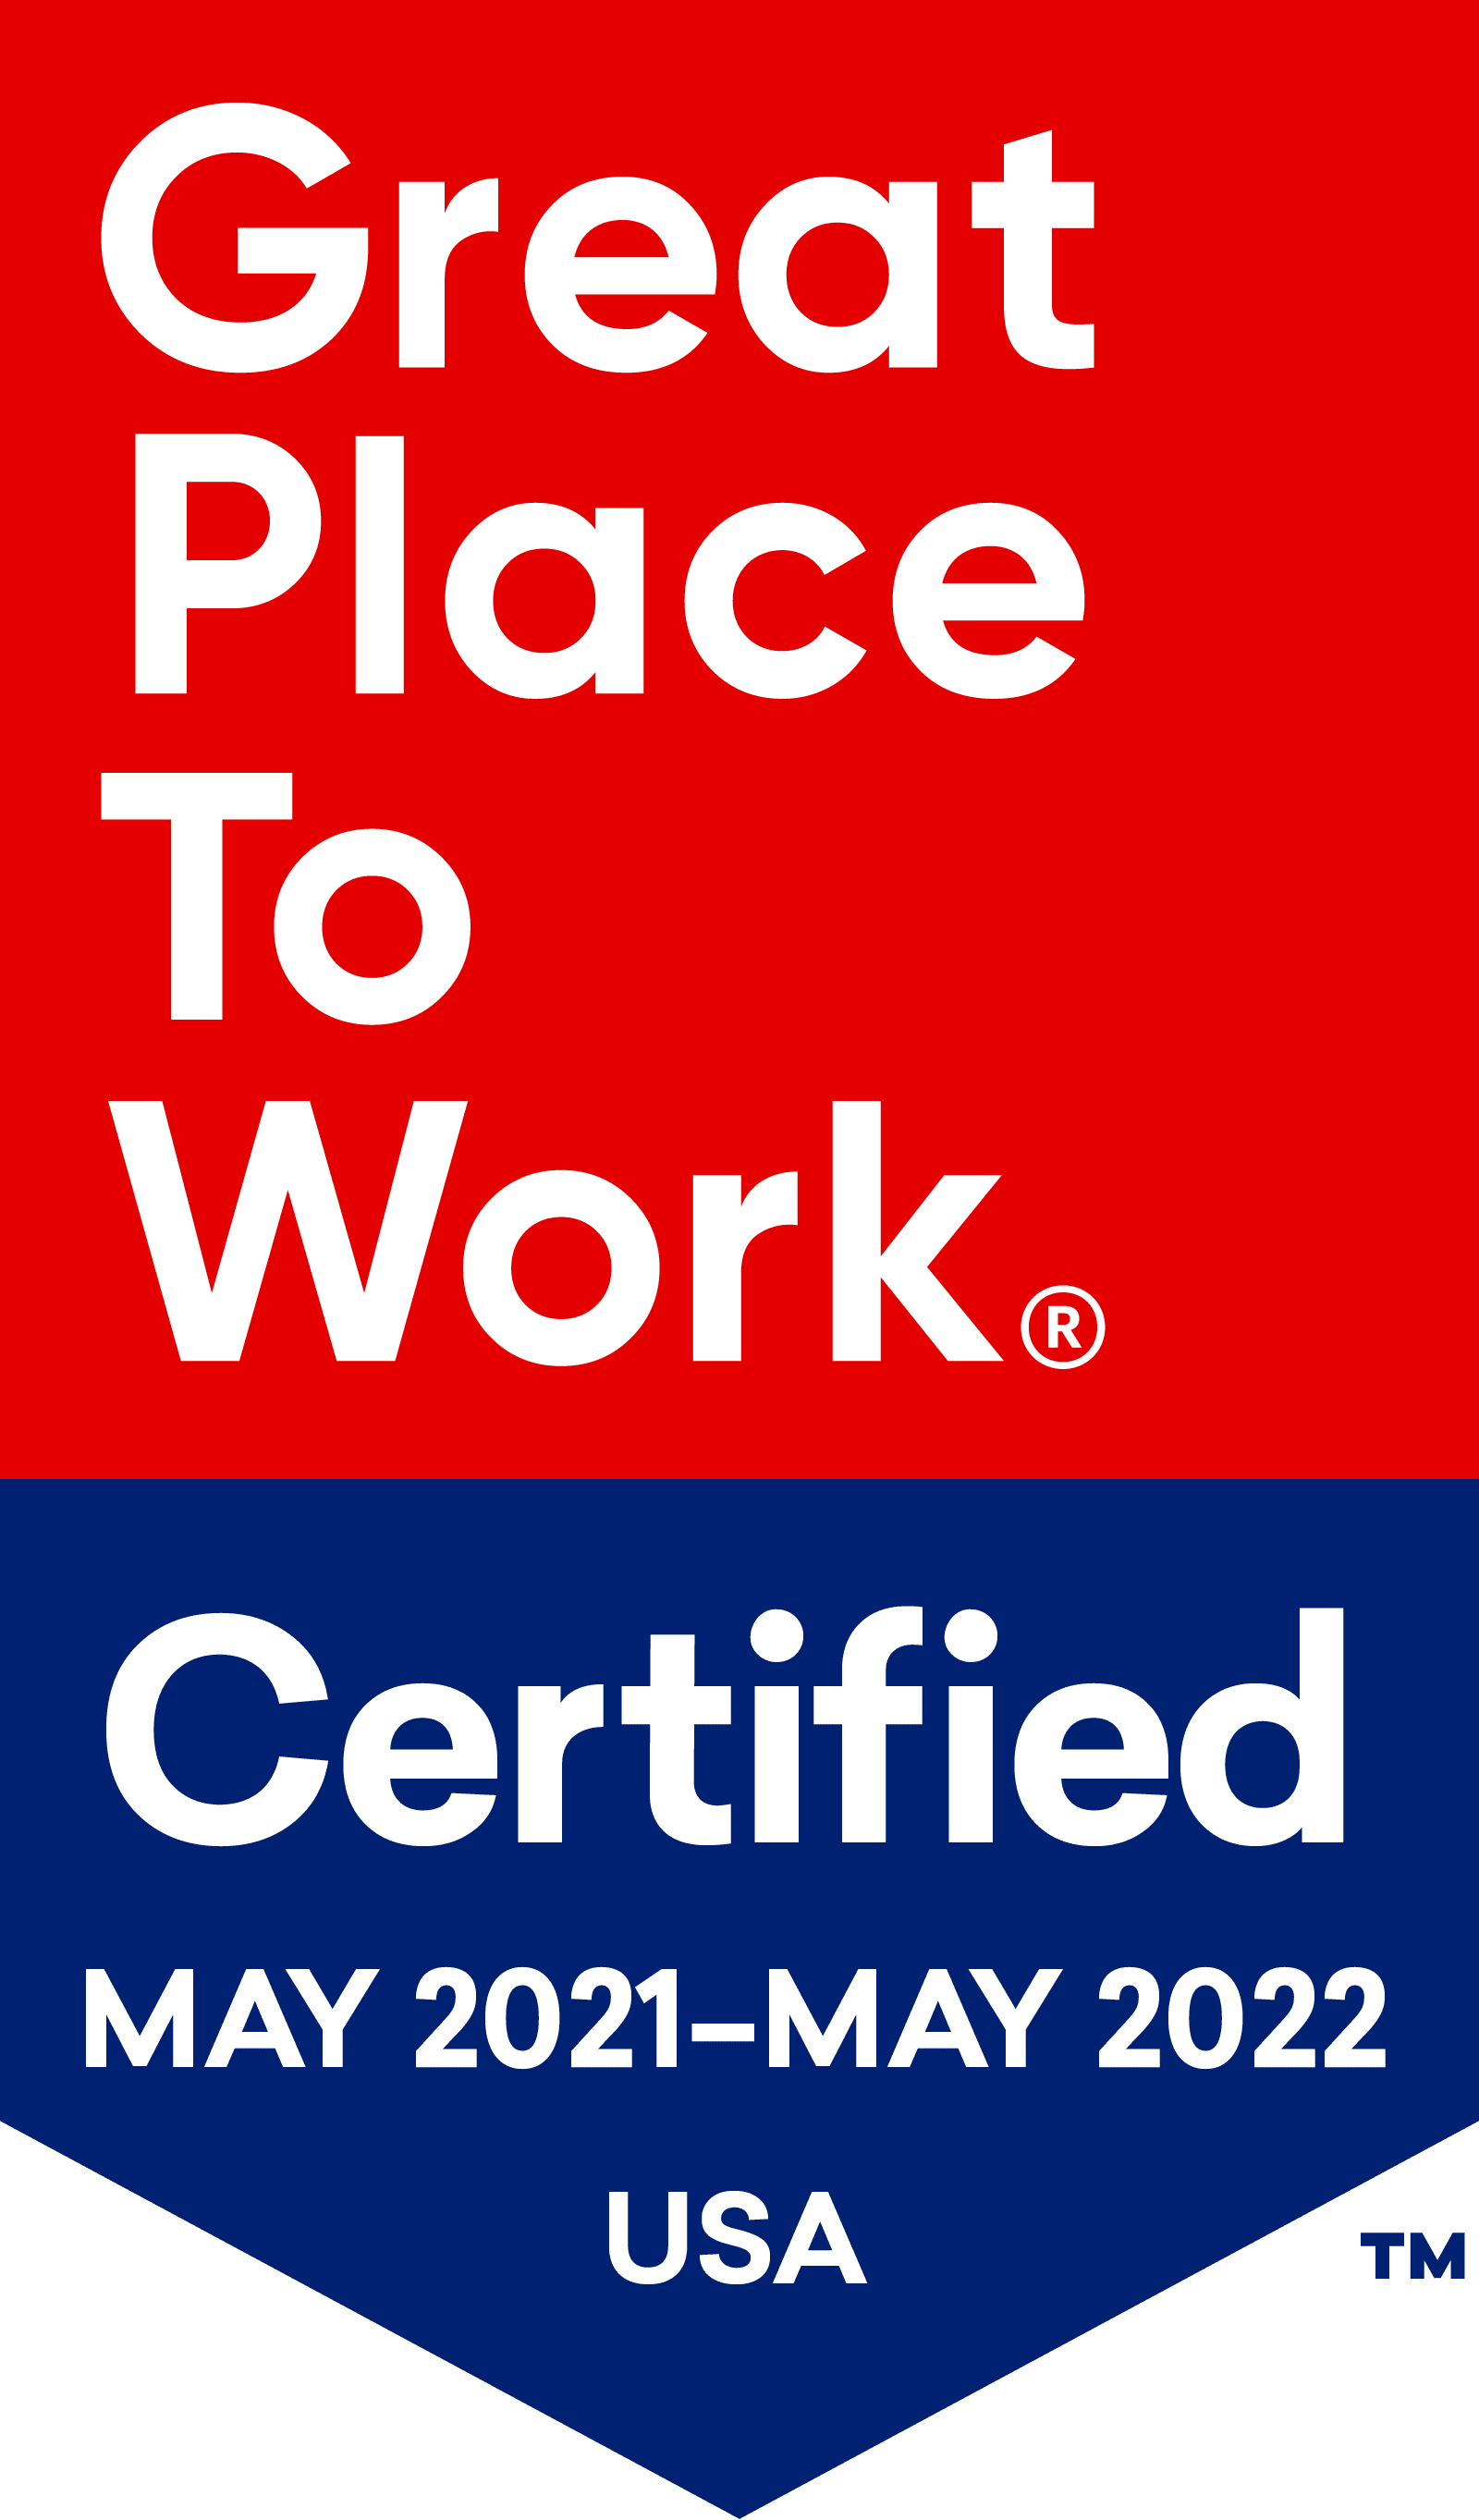 Hillcrest of Loveland is Great Place To Work Certified